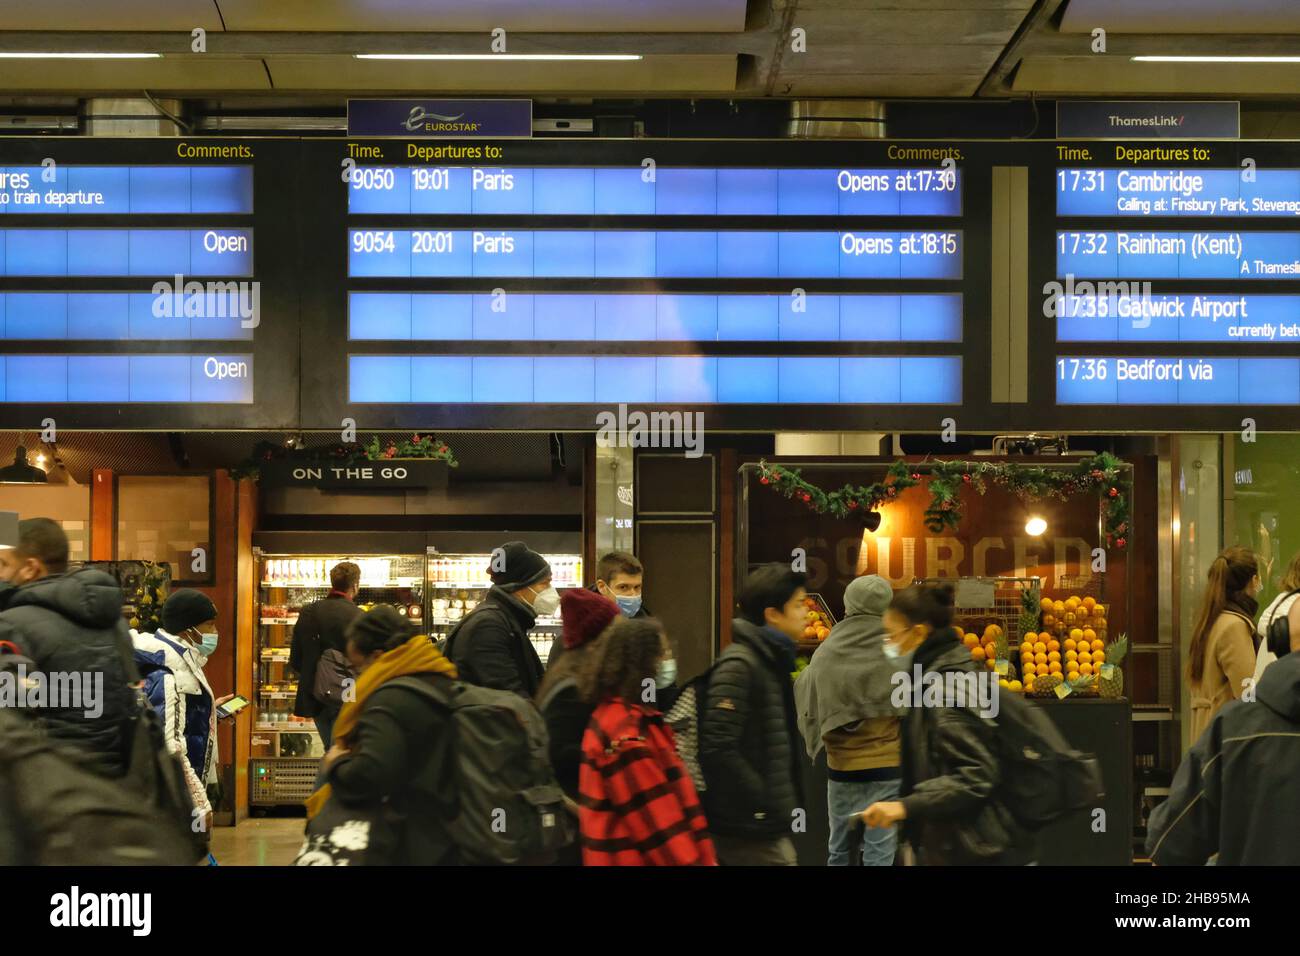 London, UK, 17th, Dec, 2021. Travellers queue in front of a departure board as they rush to leave London via St Pancras Eurostar services ahead of France's non-essential travel ban coming into force after 11pm GMT and at midnight Paris time. The restrictions are a move to stop the spread of Omicron infections as the UK records 93,045 coronavirus cases today. After midnight, non-citizens and non-residents must provide a 'compelling reason' in order to enter France from the UK. Credit: Eleventh Hour Photography/Alamy Live News Stock Photo